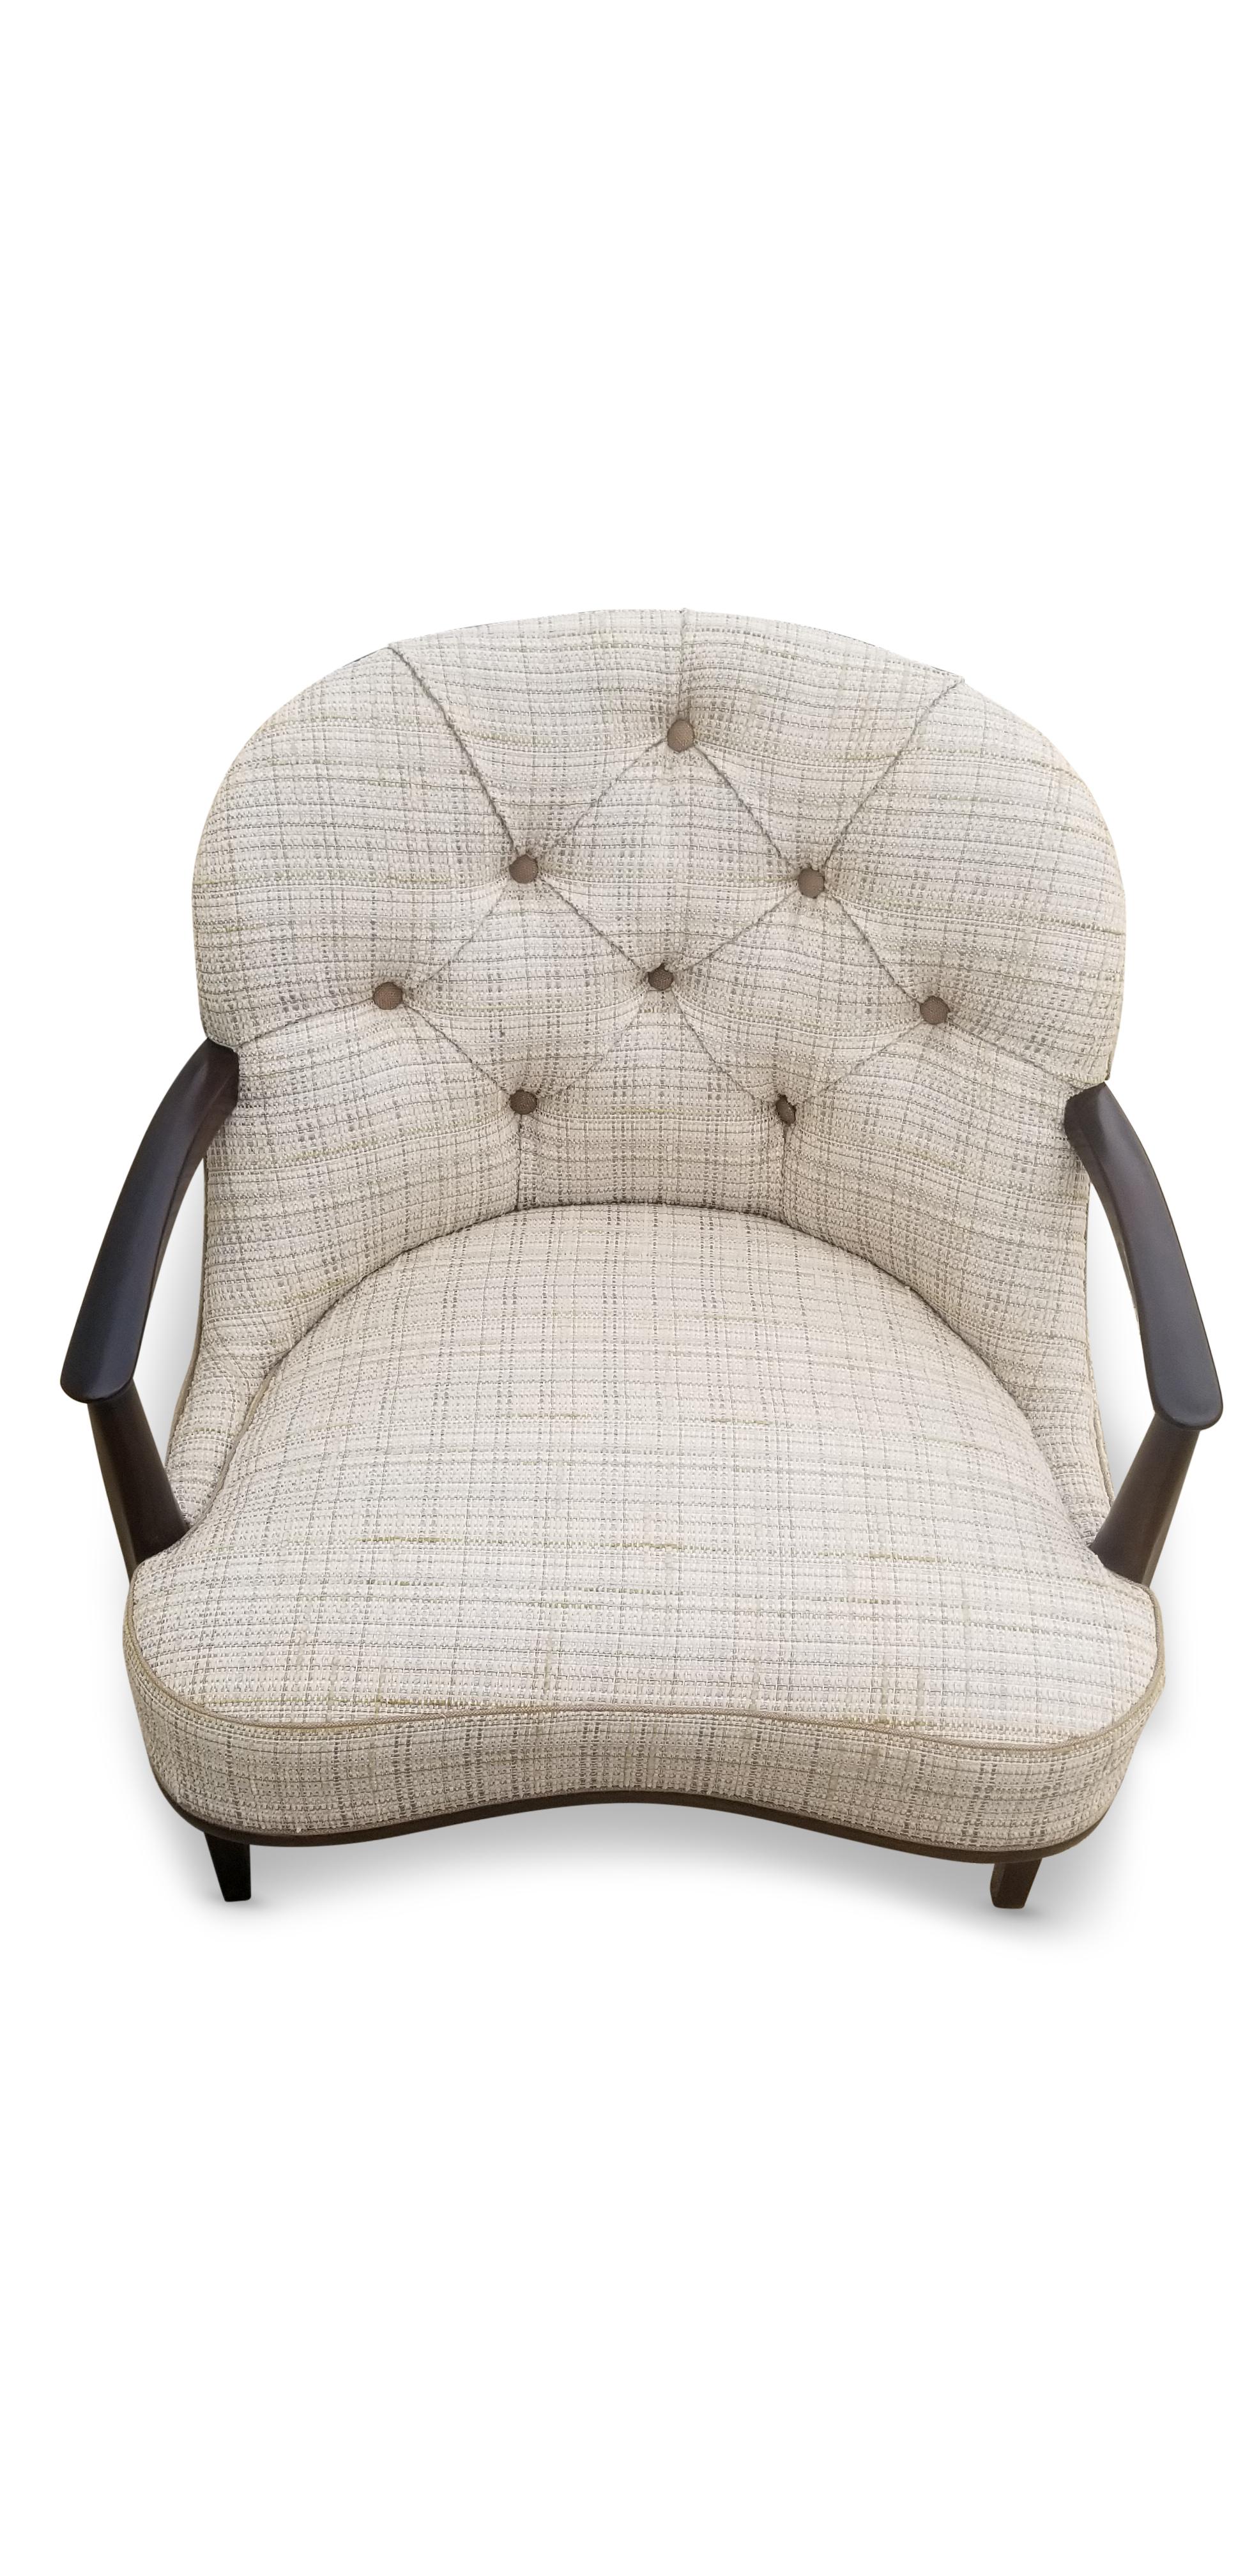 Fabric Edward Wormley for Dunbar Janus Collection Lounge Chair For Sale